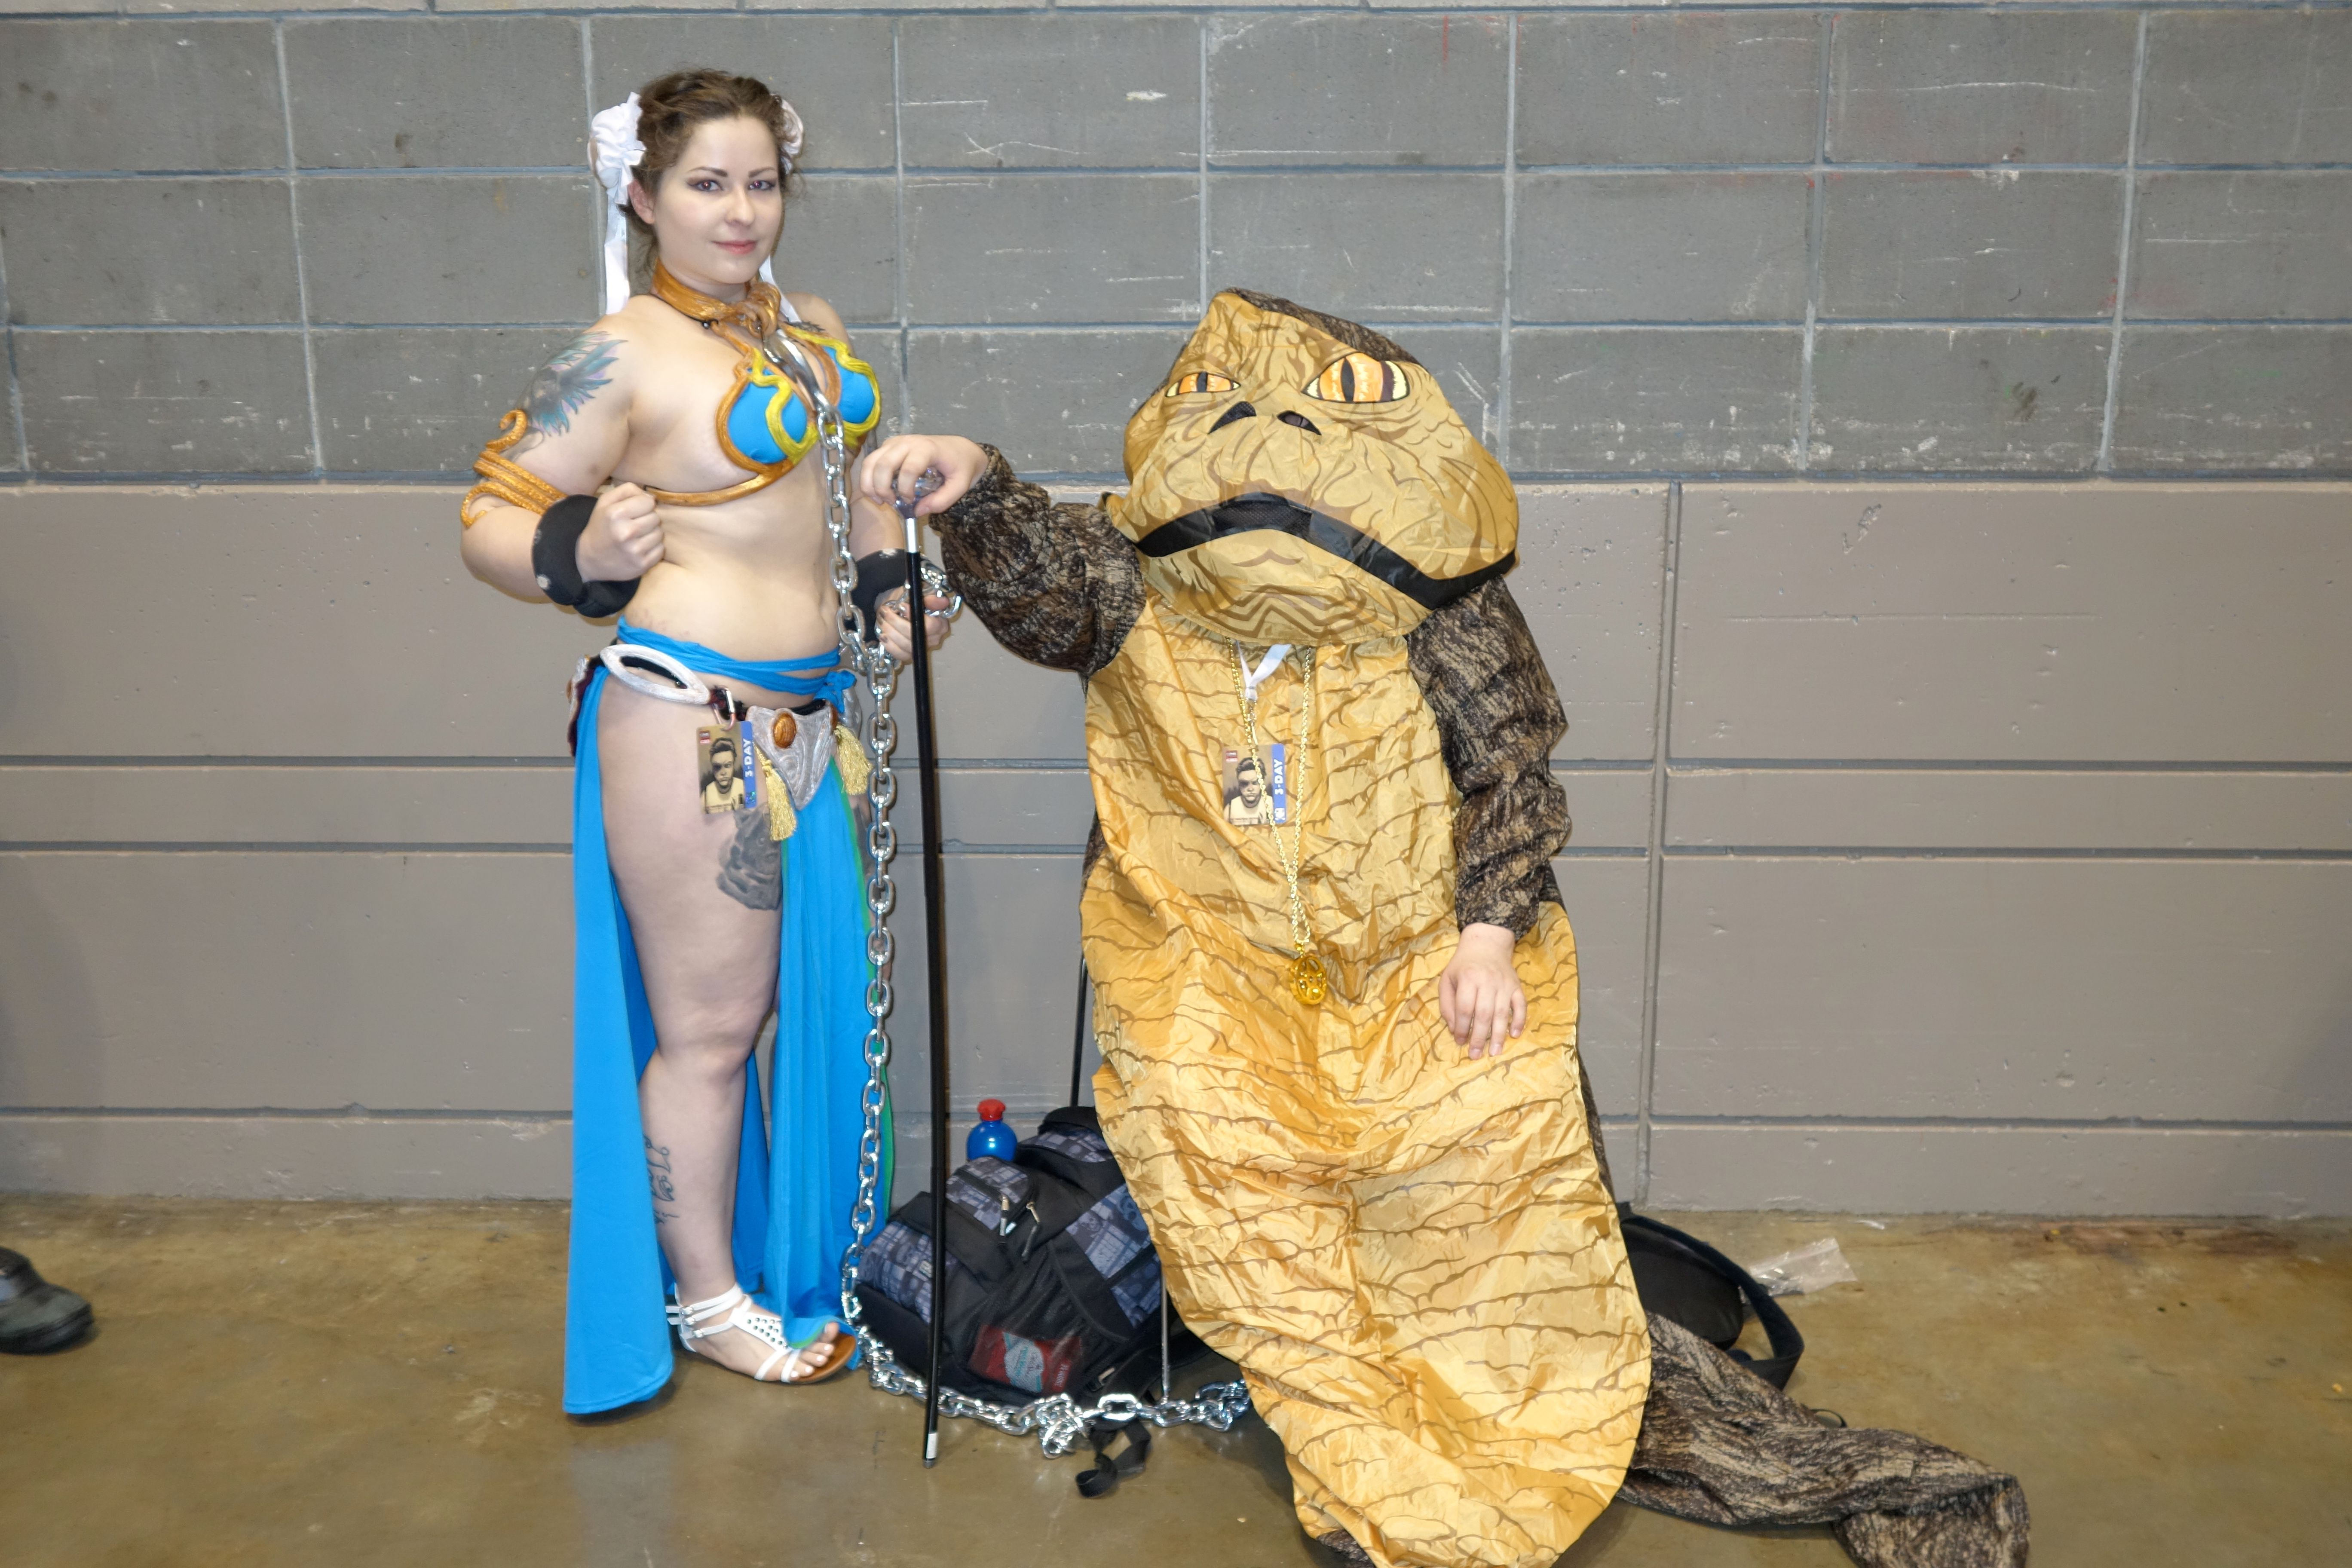 Cosplay: Over 50 Pictures from C2E2 2015. Costumes include Halo, Star Wars, Batman ...